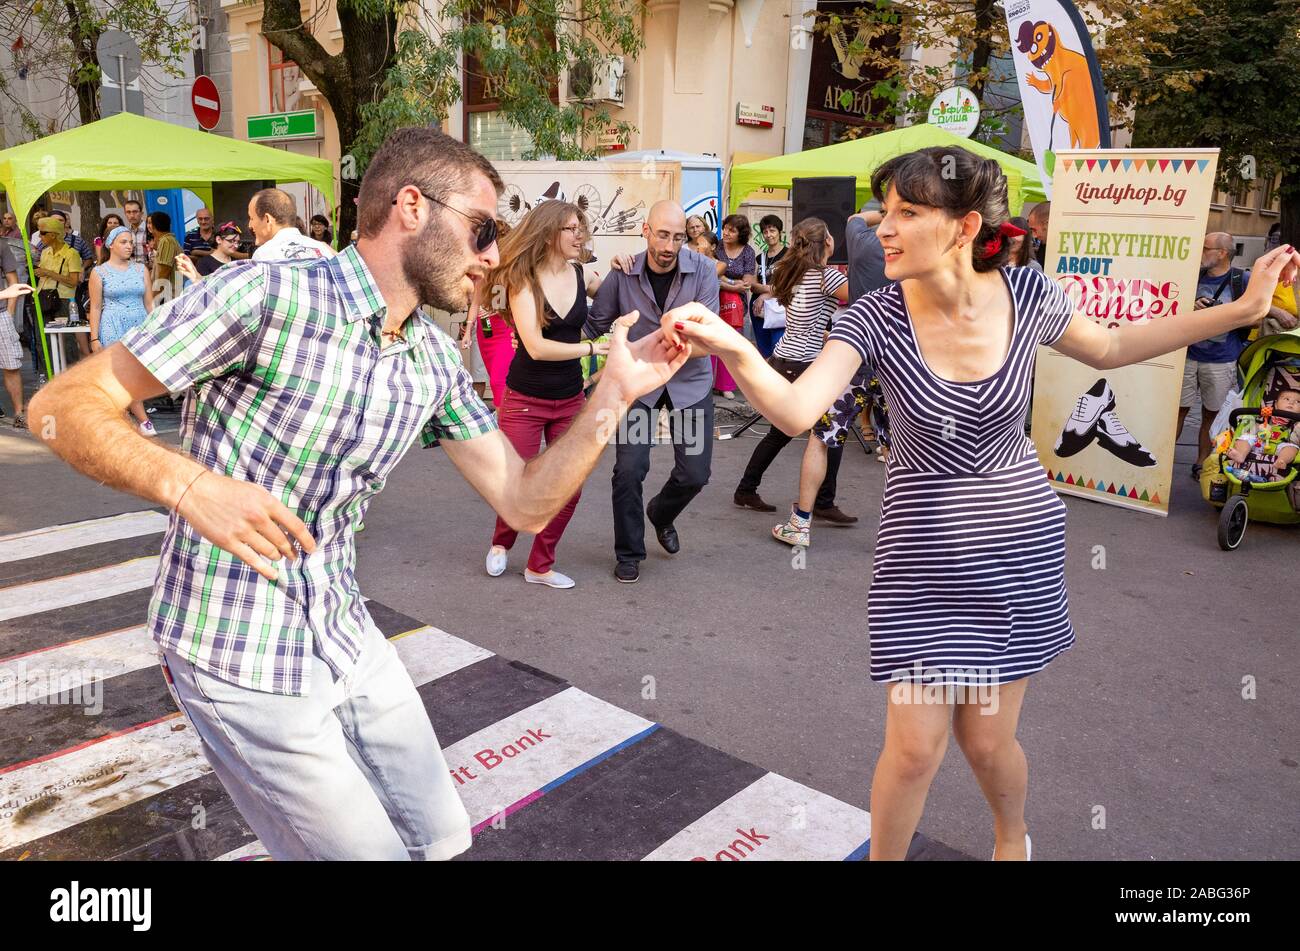 Members of a swing group dancing on the street, Sofia, Bulgaria Stock Photo